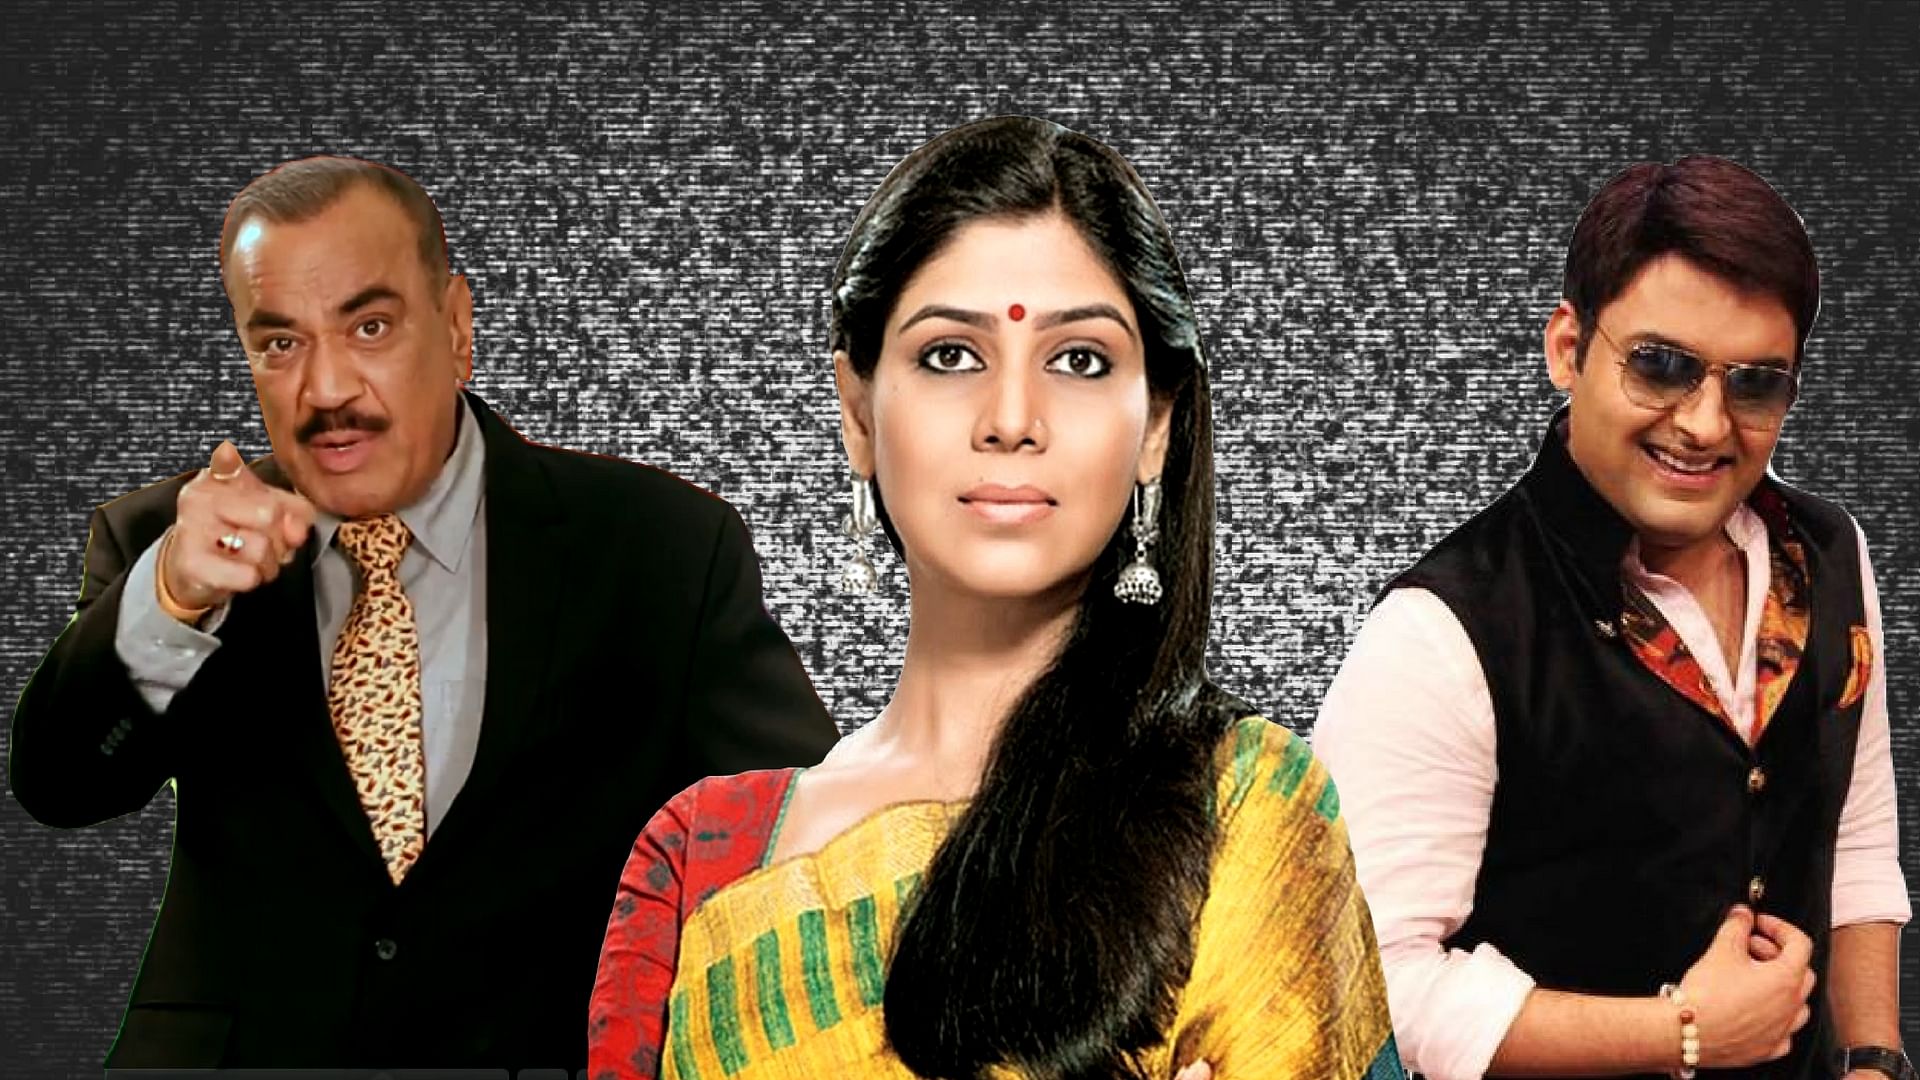 Shivaji Satam, Sakshi Tanwar and Kapil Sharma: Indian TV’s biggest stars and how much they make. (Photo: Promotional stills, altered by The Quint)